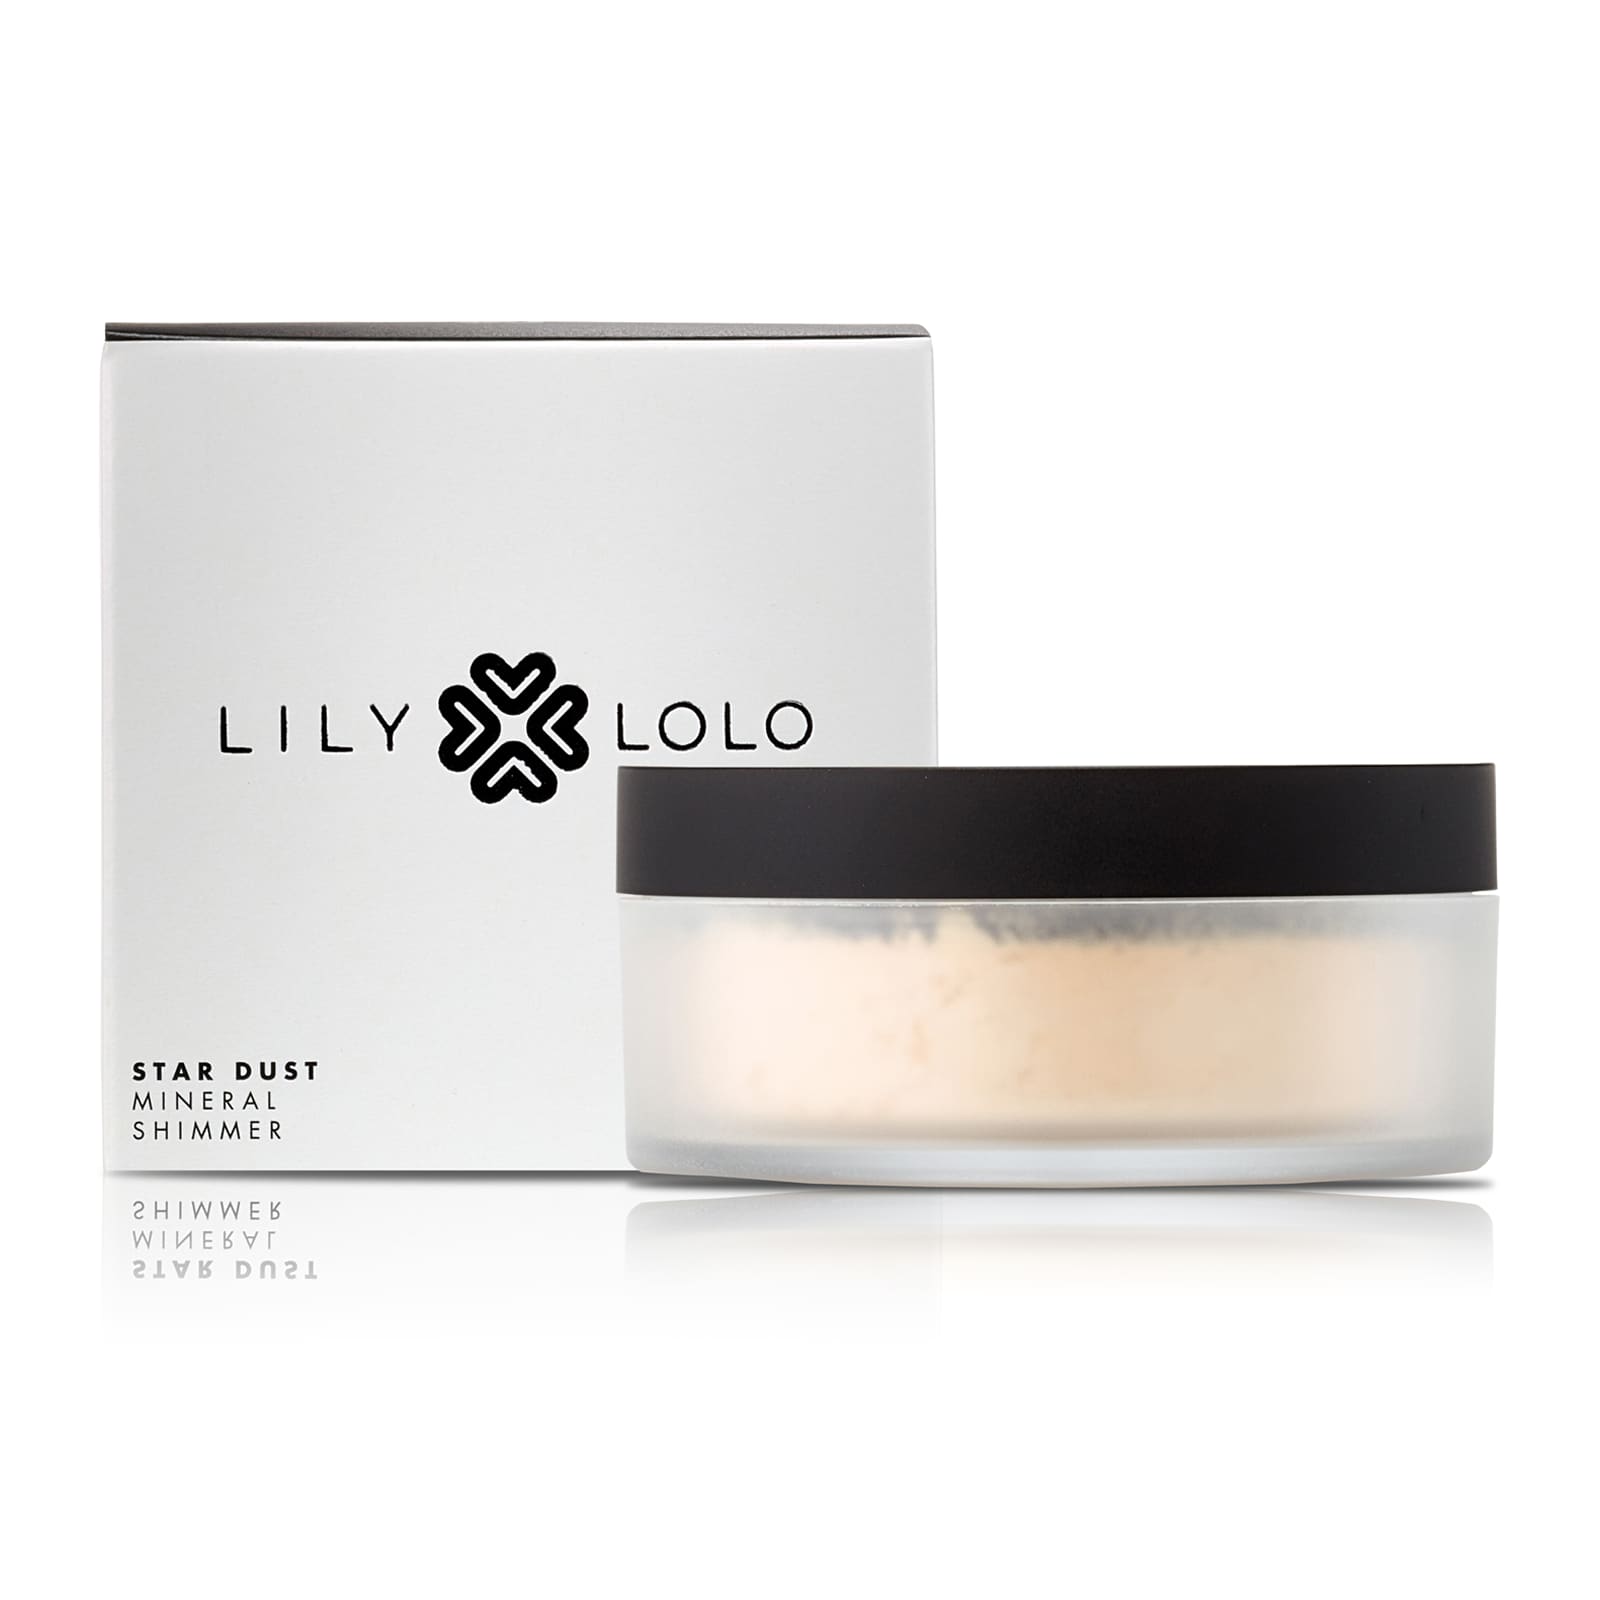 Lily Lolo Iluminador mineral Star Dust (6g.)